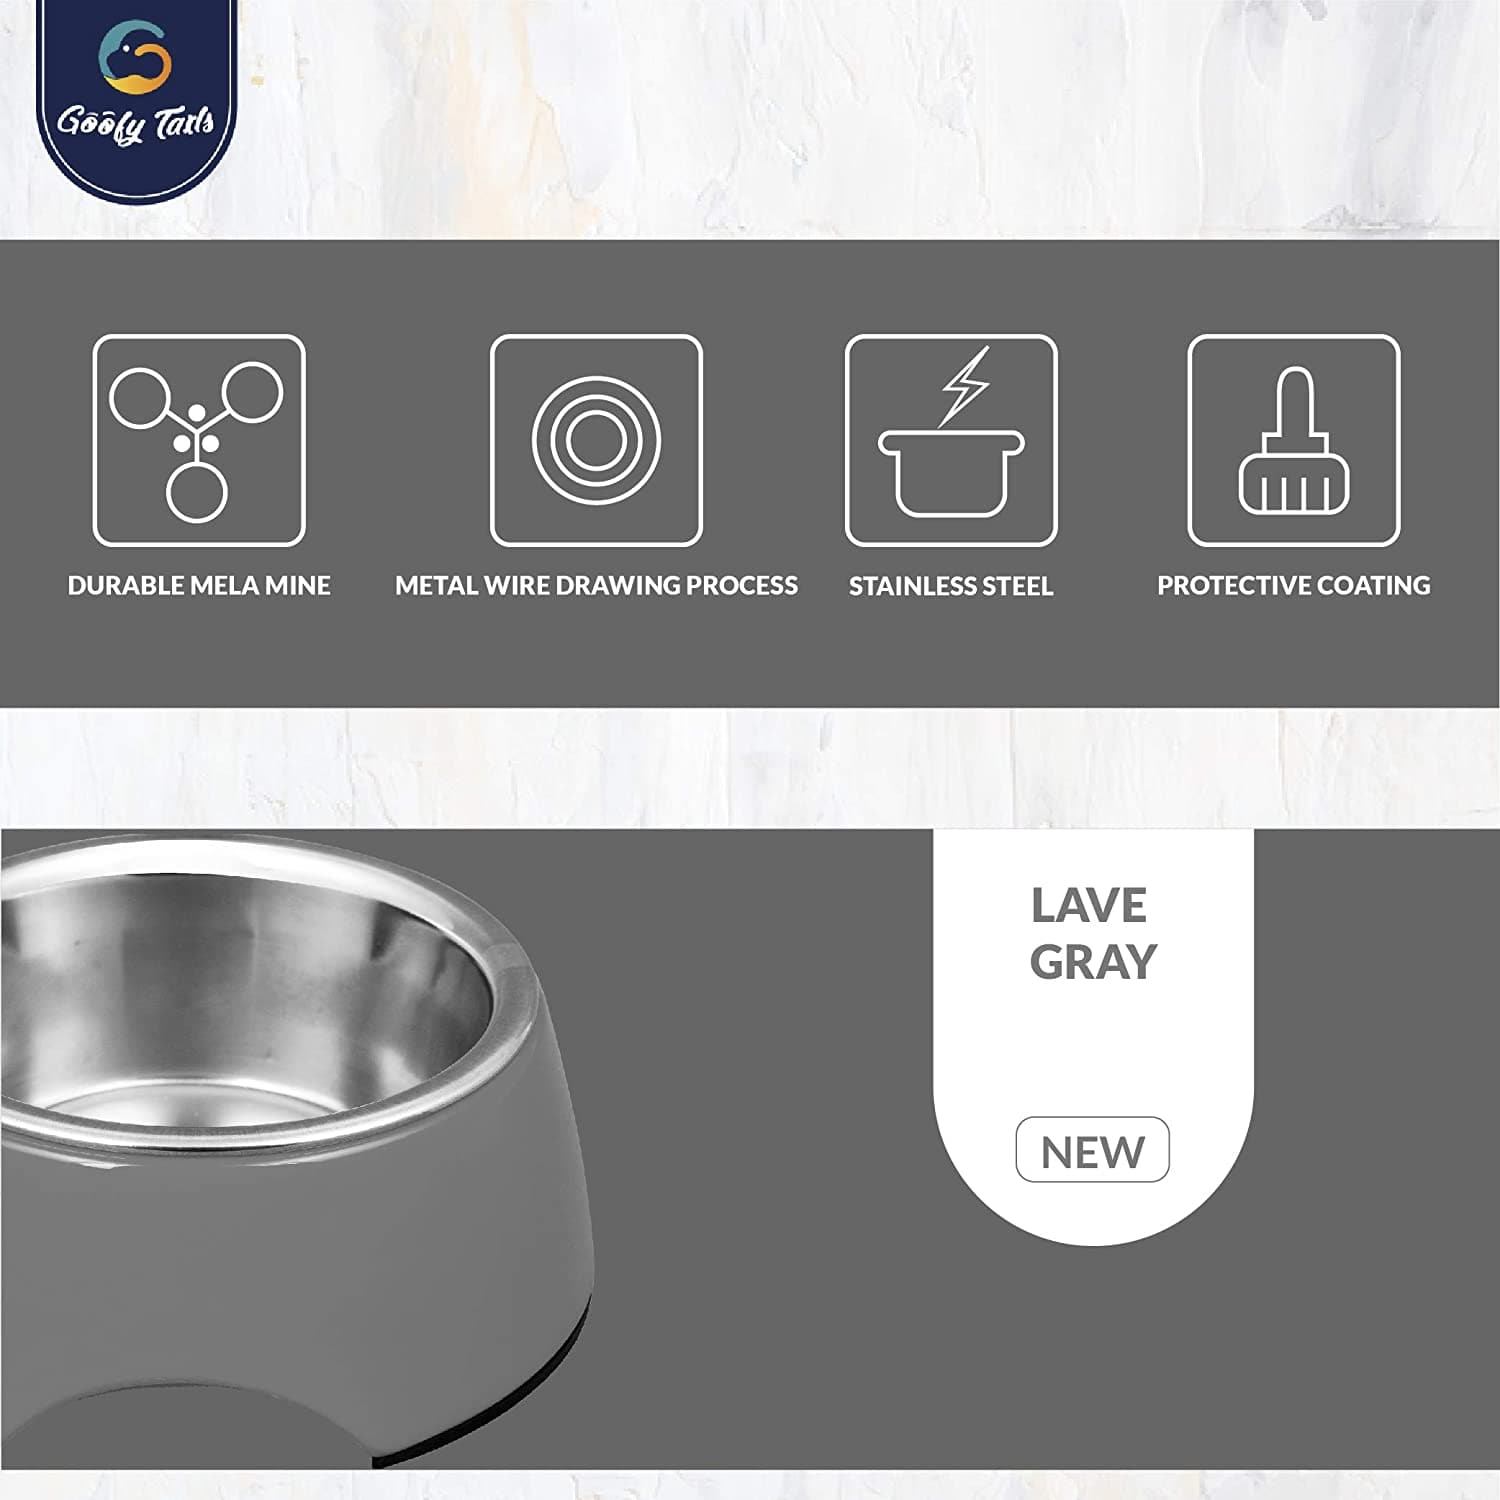 stainless steel dog bowl (7168378470550)